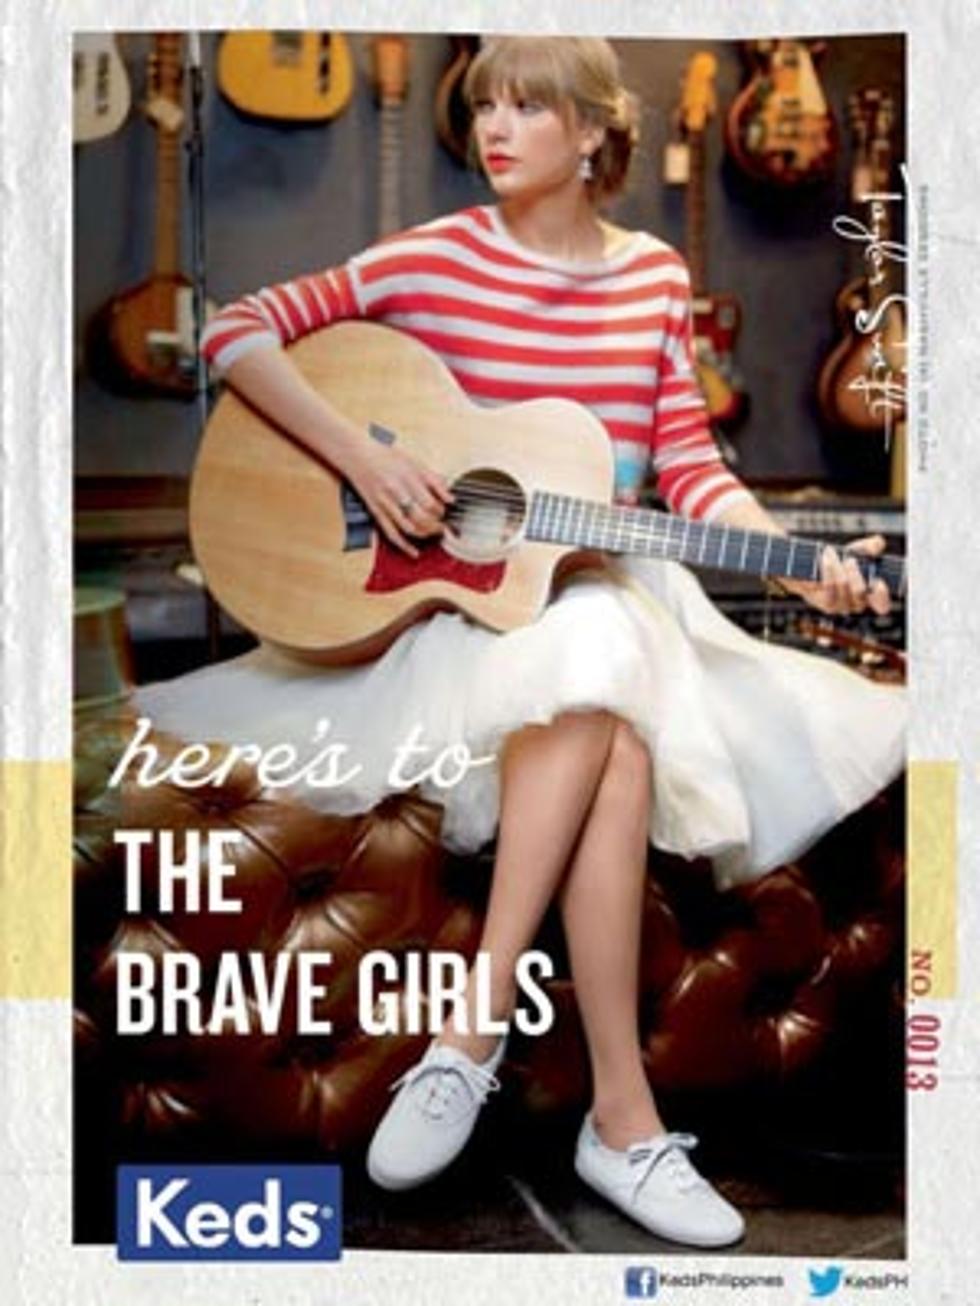 Taylor Swift Plays Guitar in Keds Ad